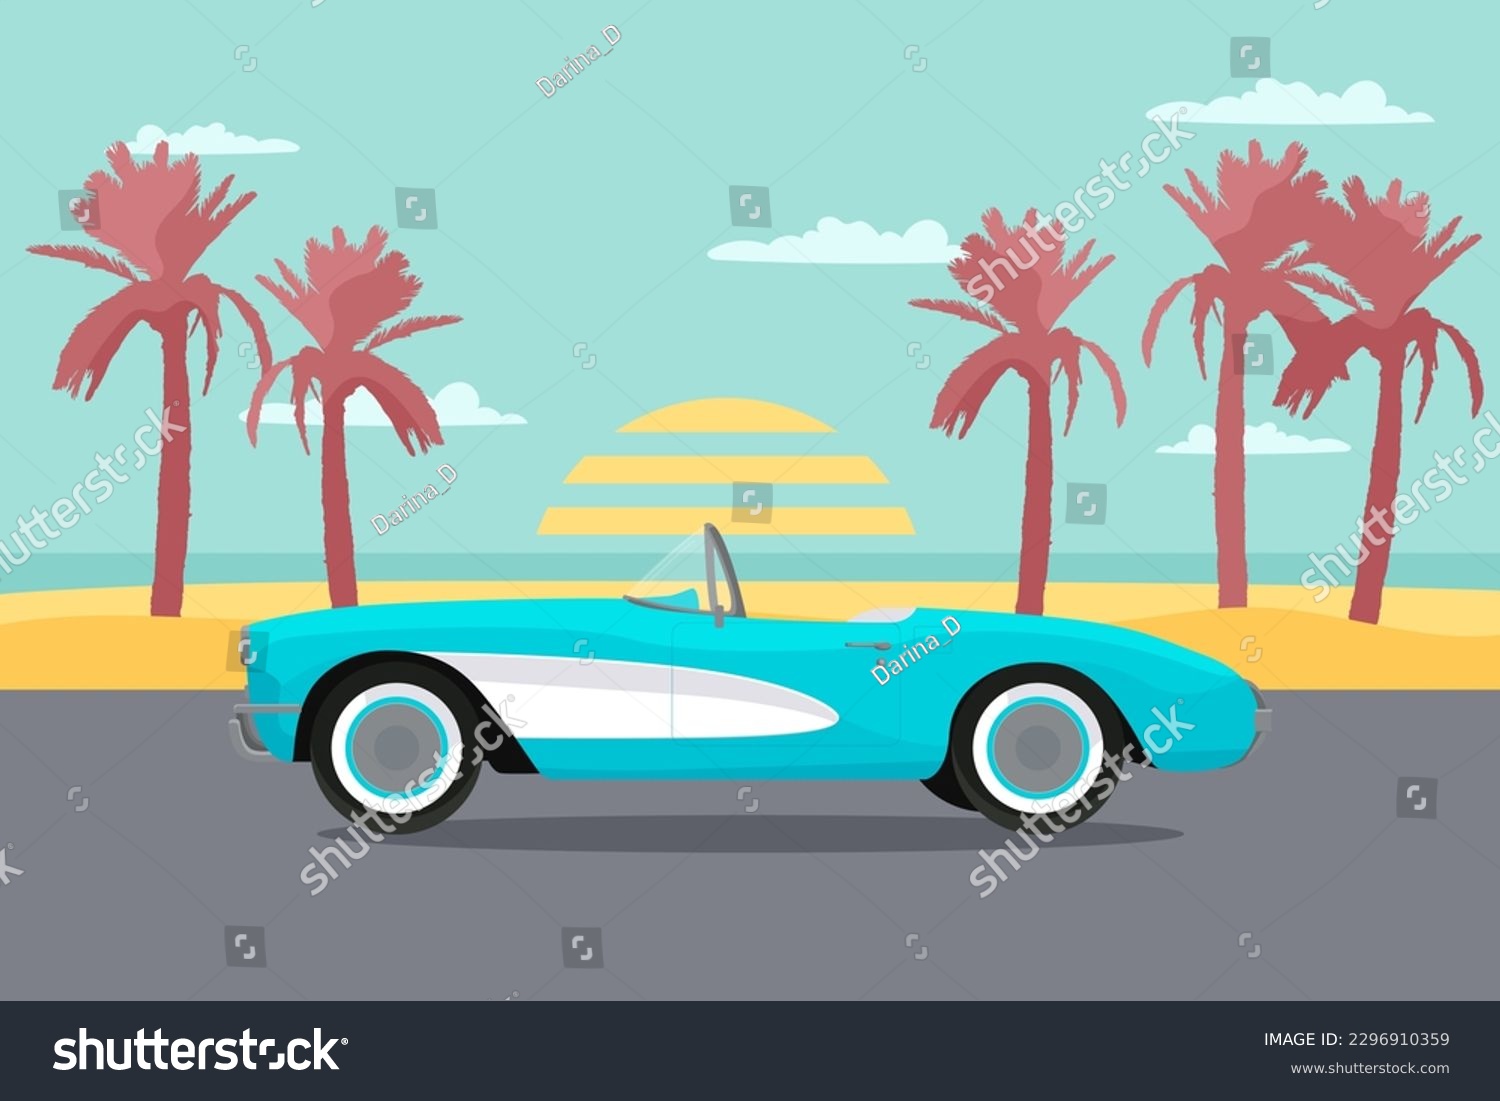 SVG of Summer retro poster with classic car. Vintage beach with palm trees silhouette, sunset on background. Horizont illustration for card, print design. Vector svg